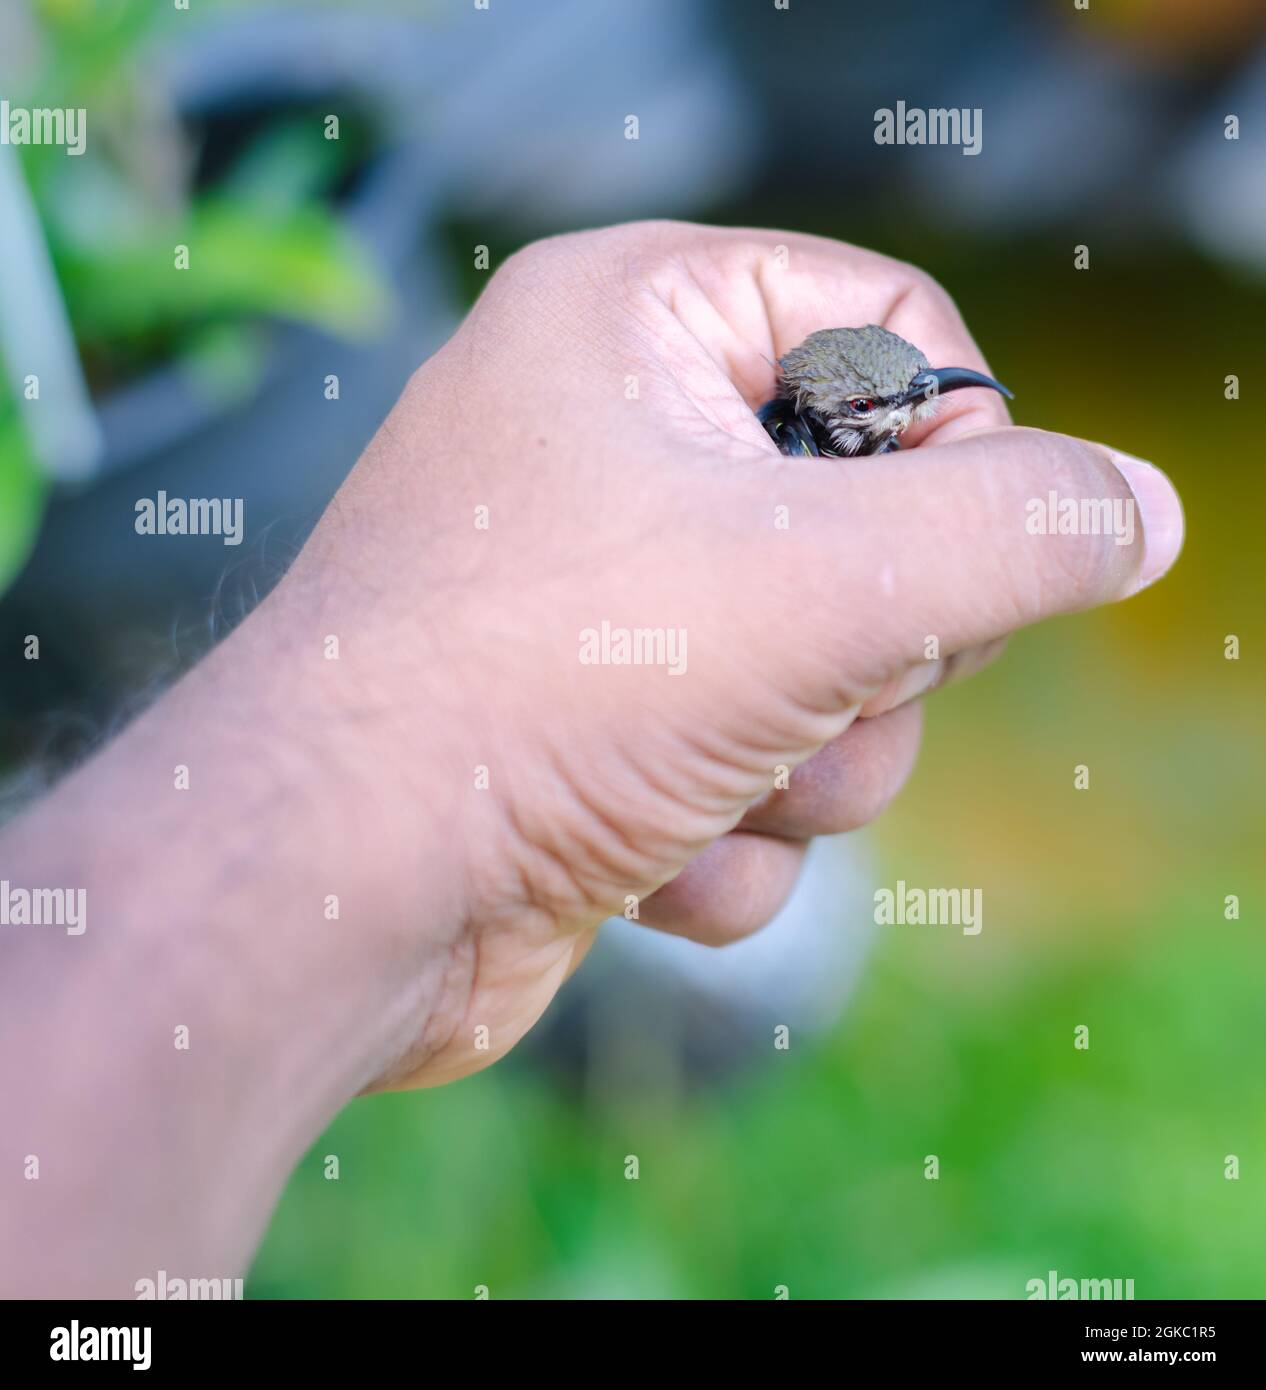 Crimson-backed sunbird hatchling holding by a male hand. Newborn baby bird in the warmth of the kind human being, the concept of the helping hand to t Stock Photo